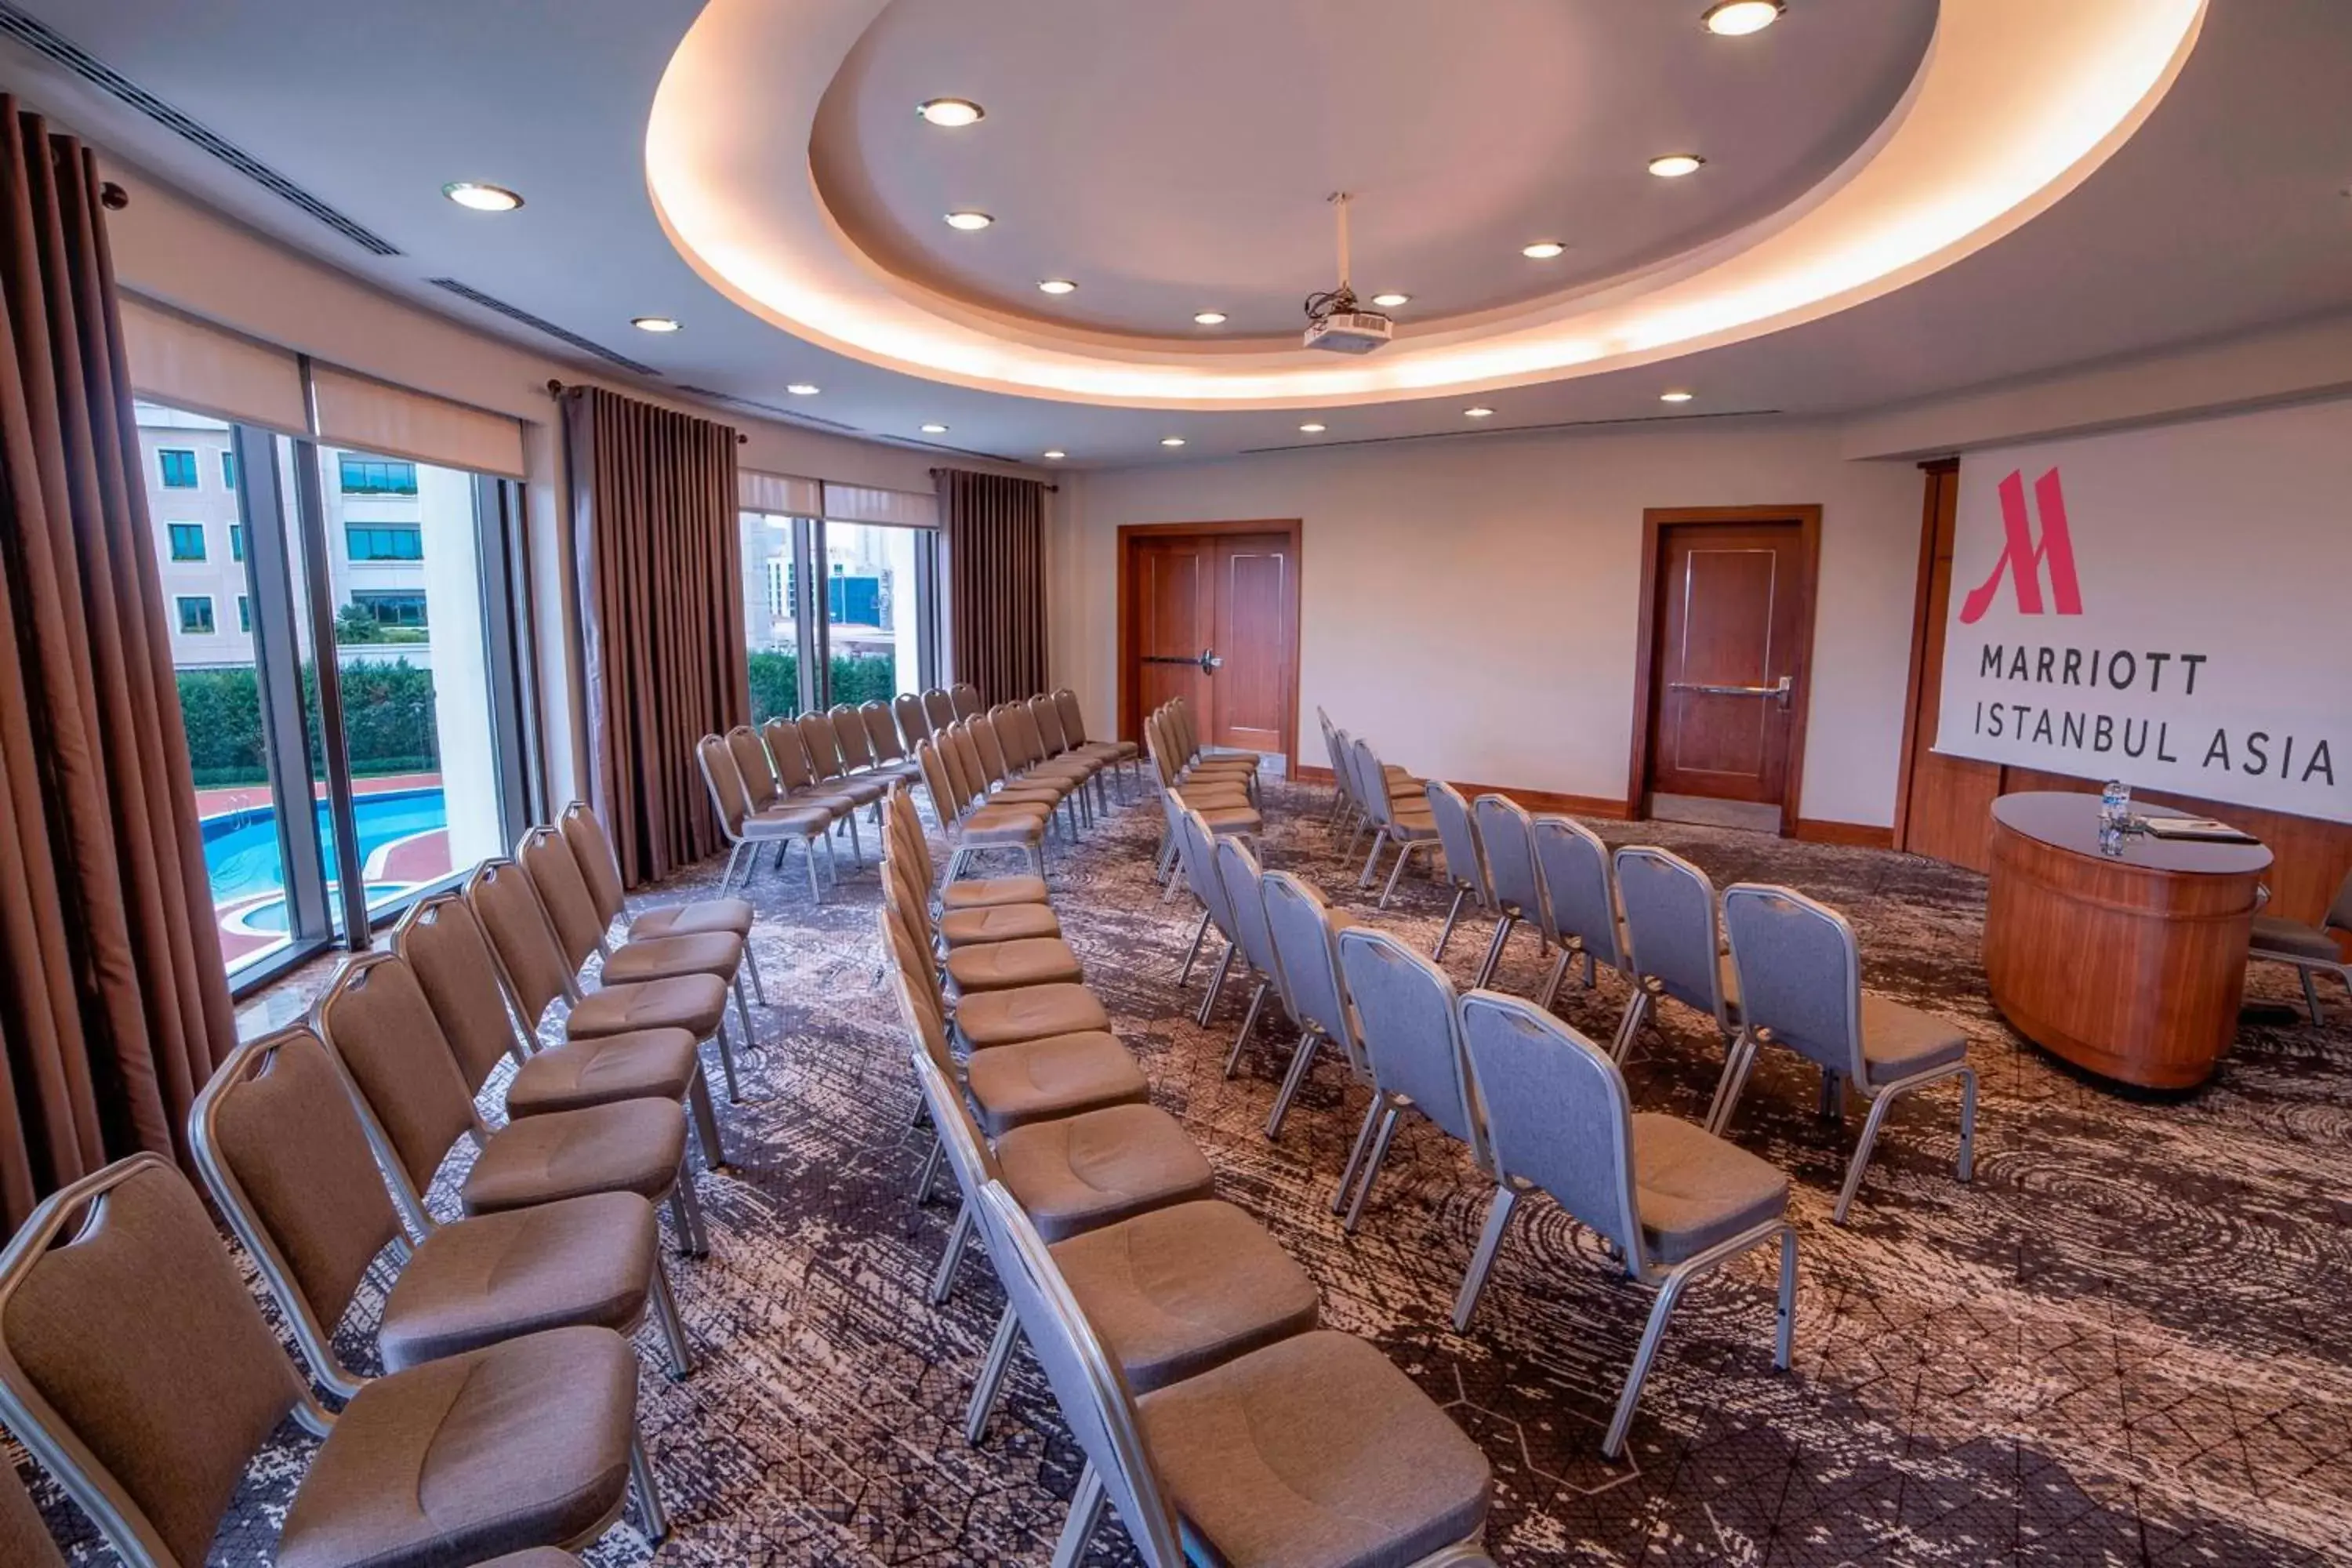 Meeting/conference room in Istanbul Marriott Hotel Asia